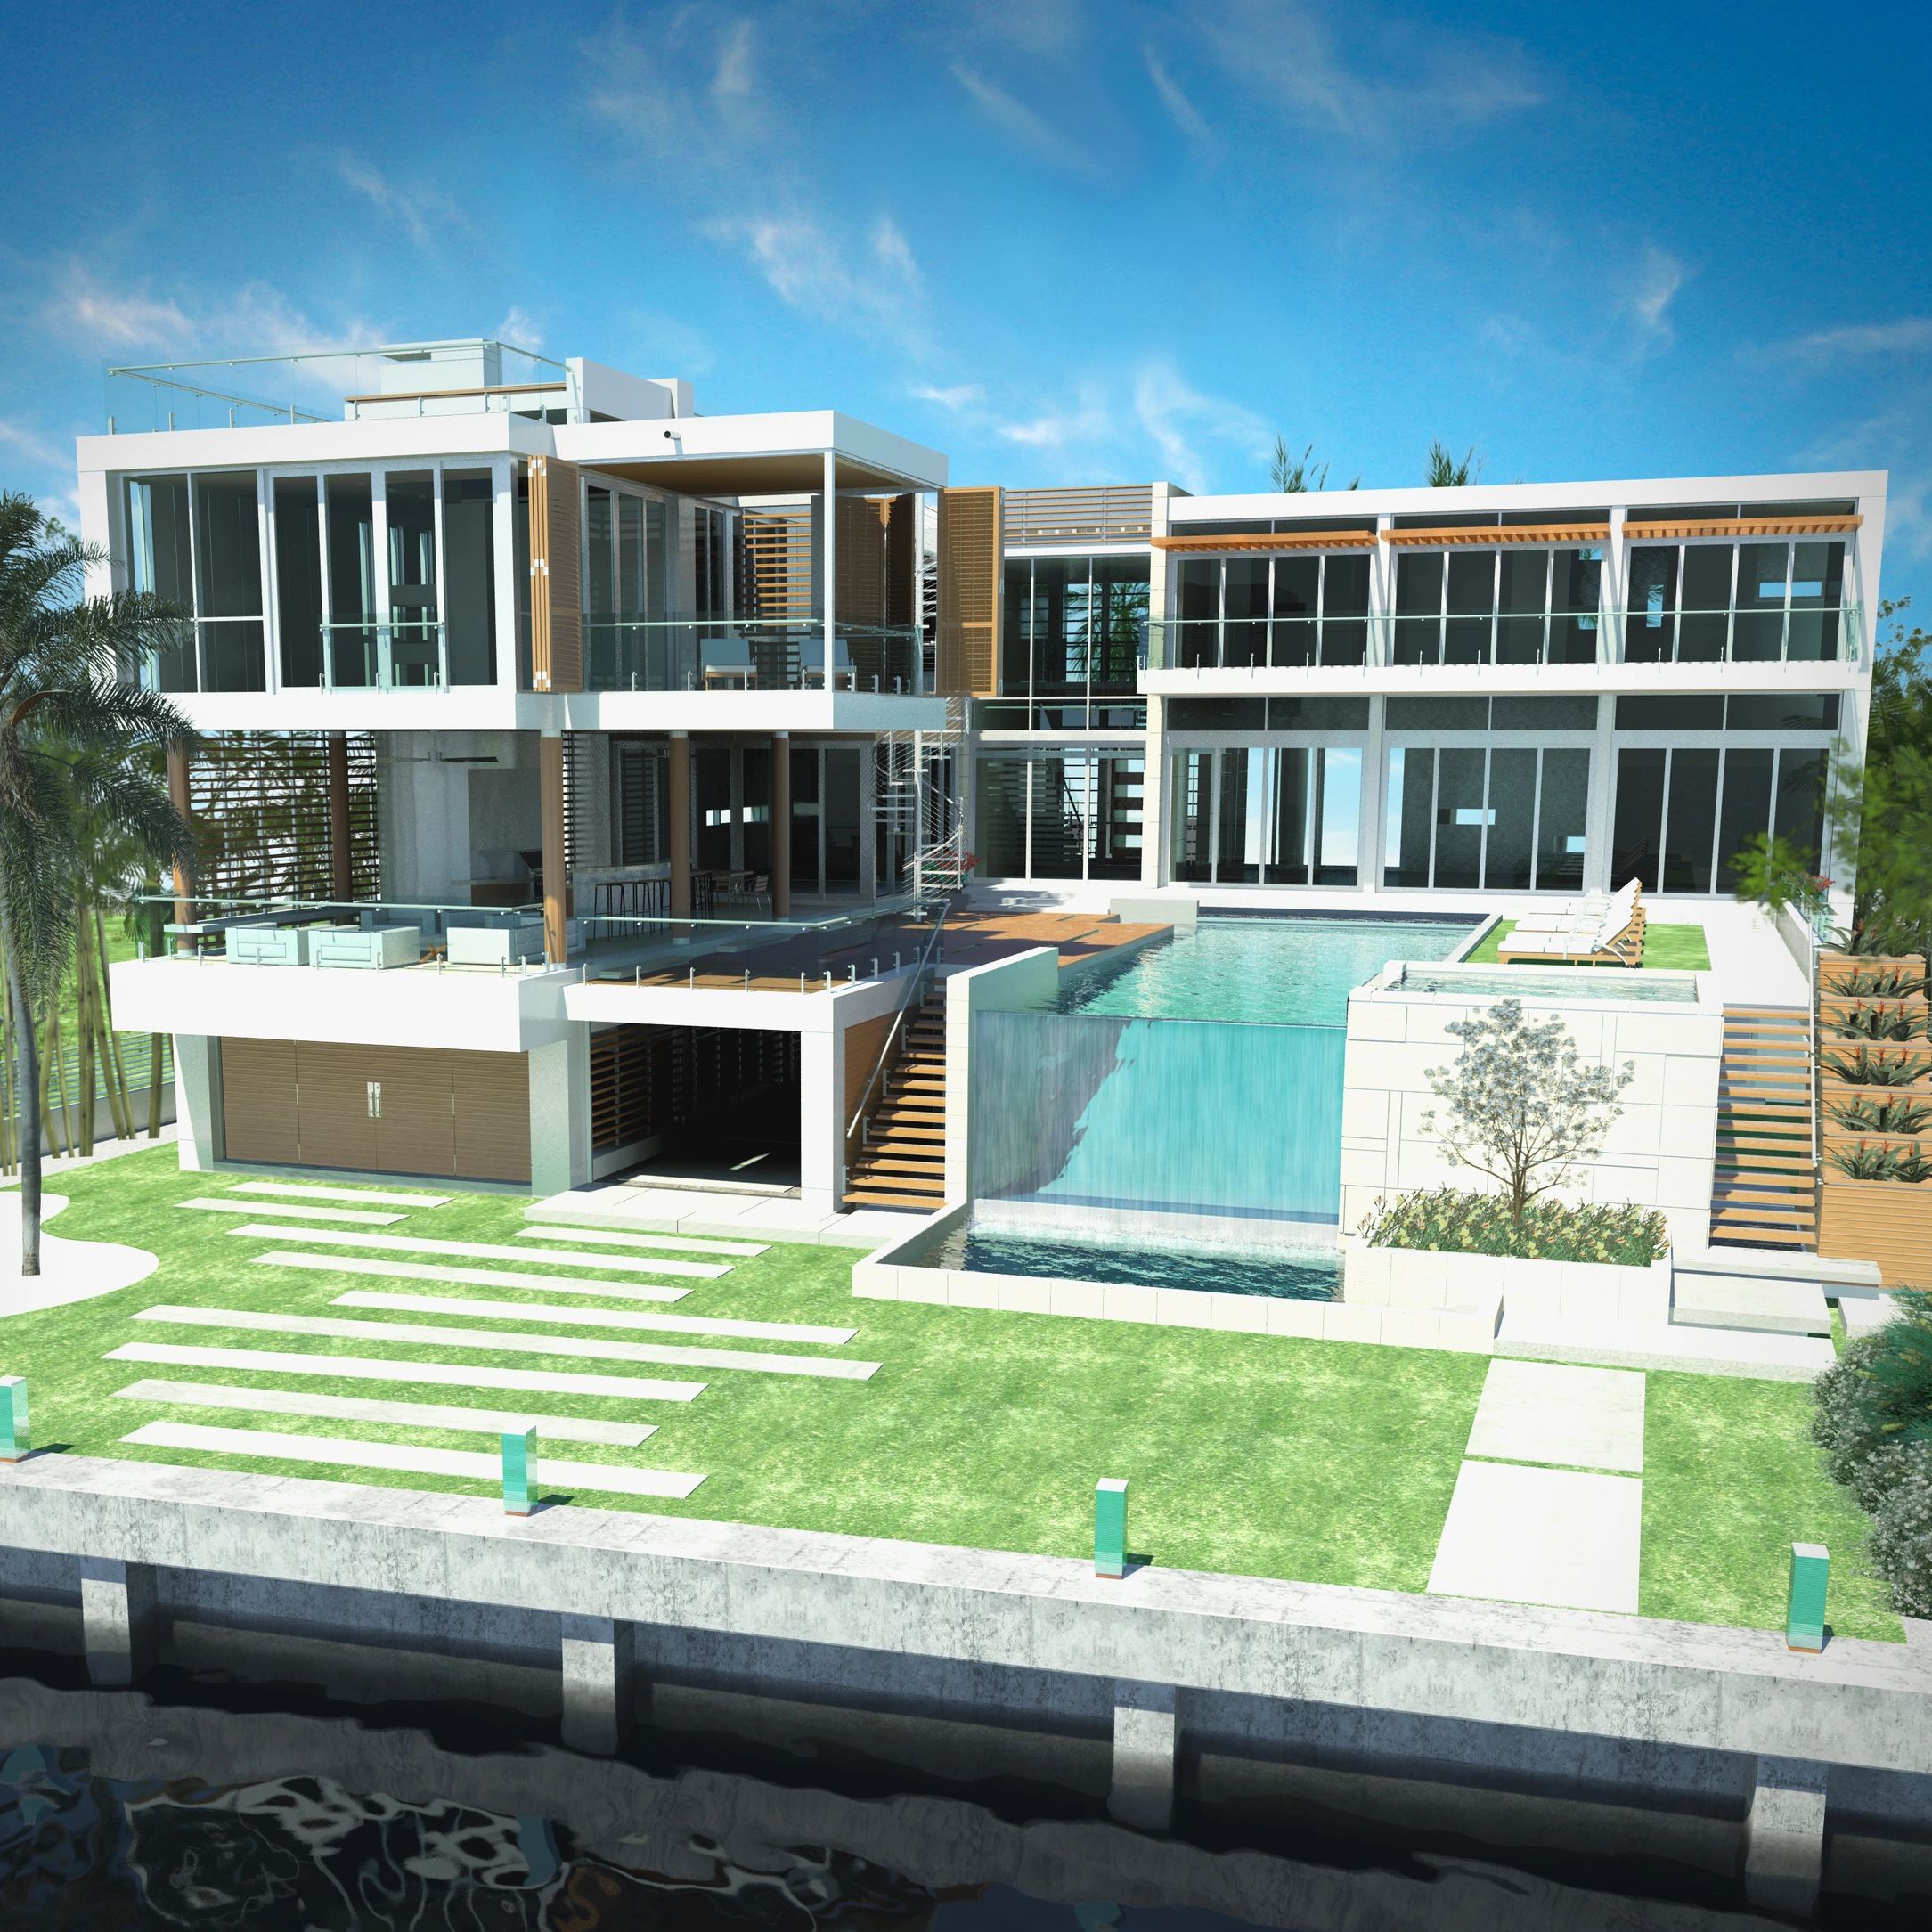 View from Biscayne Bay Looking at pool, pool deck, terrace, master bedroom with terrace.